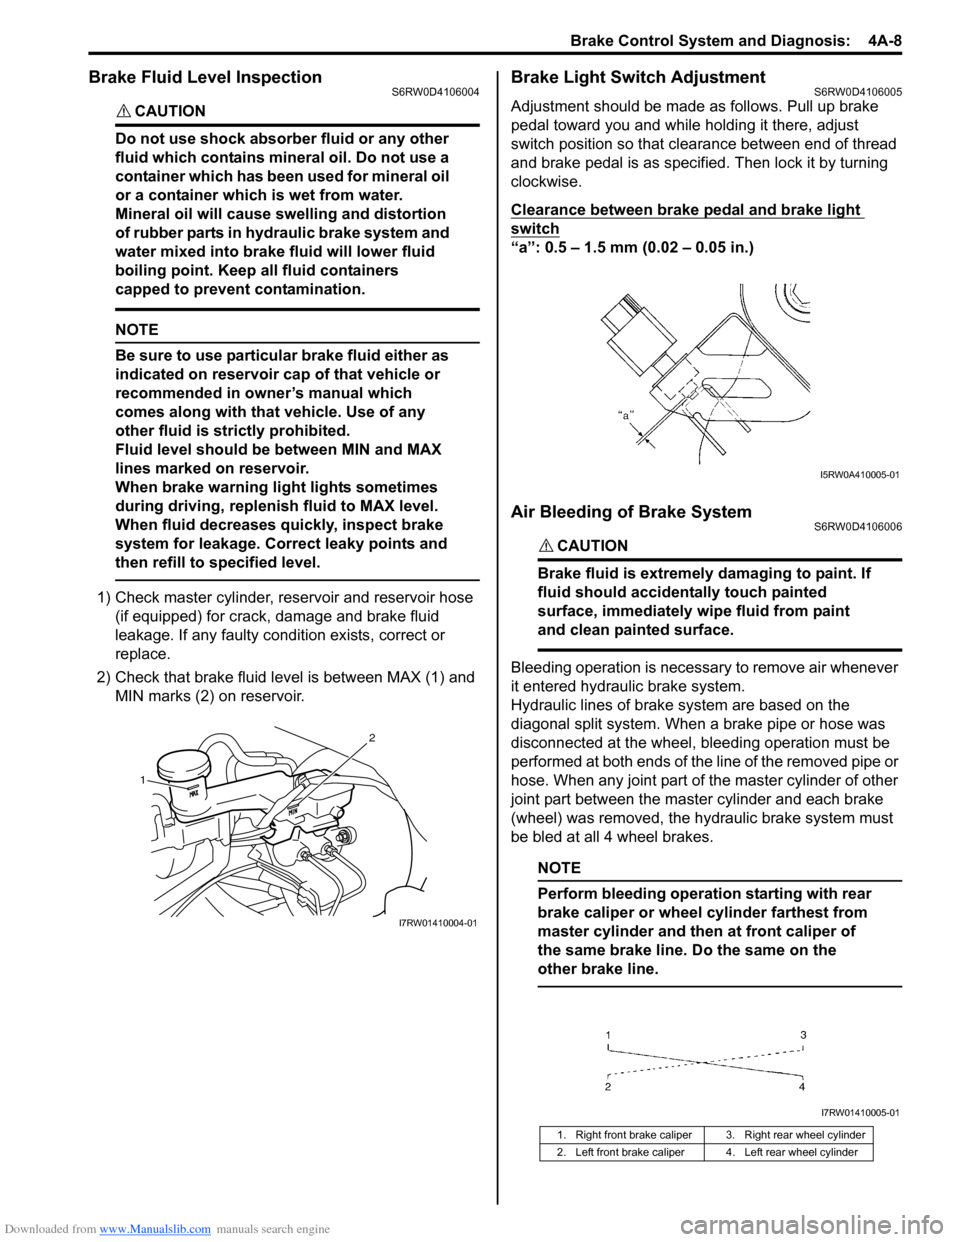 SUZUKI SX4 2006 1.G Service Workshop Manual Downloaded from www.Manualslib.com manuals search engine Brake Control System and Diagnosis:  4A-8
Brake Fluid Level InspectionS6RW0D4106004
CAUTION! 
Do not use shock absorber fluid or any other 
flu